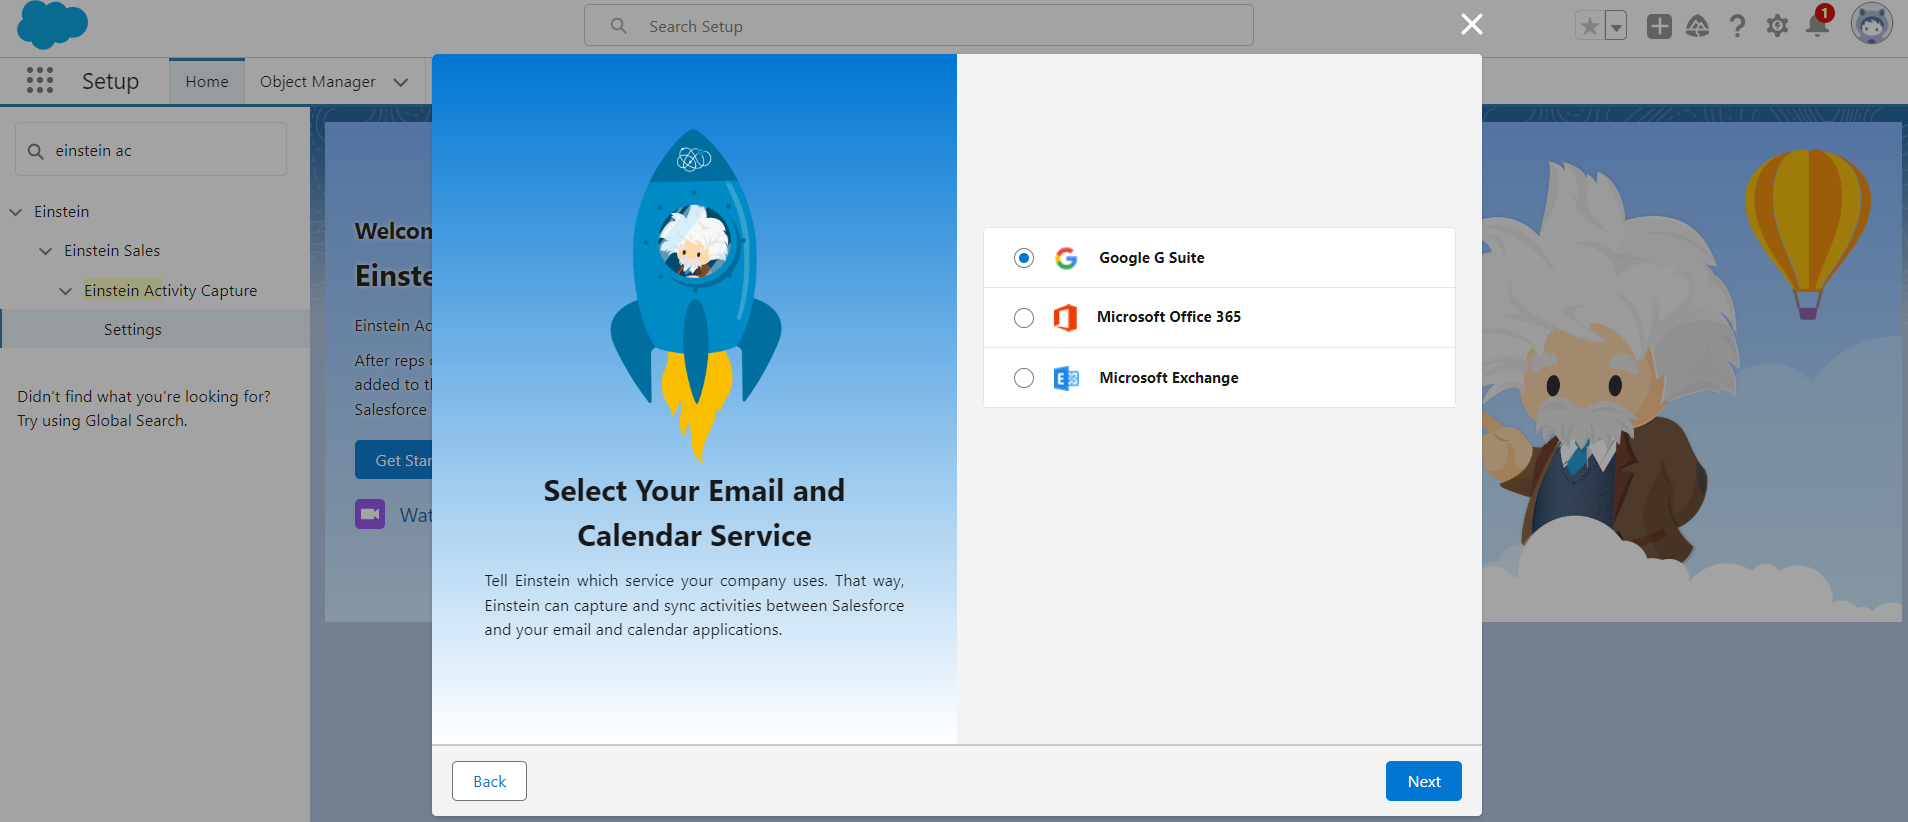 Select Your email and Calendar Service